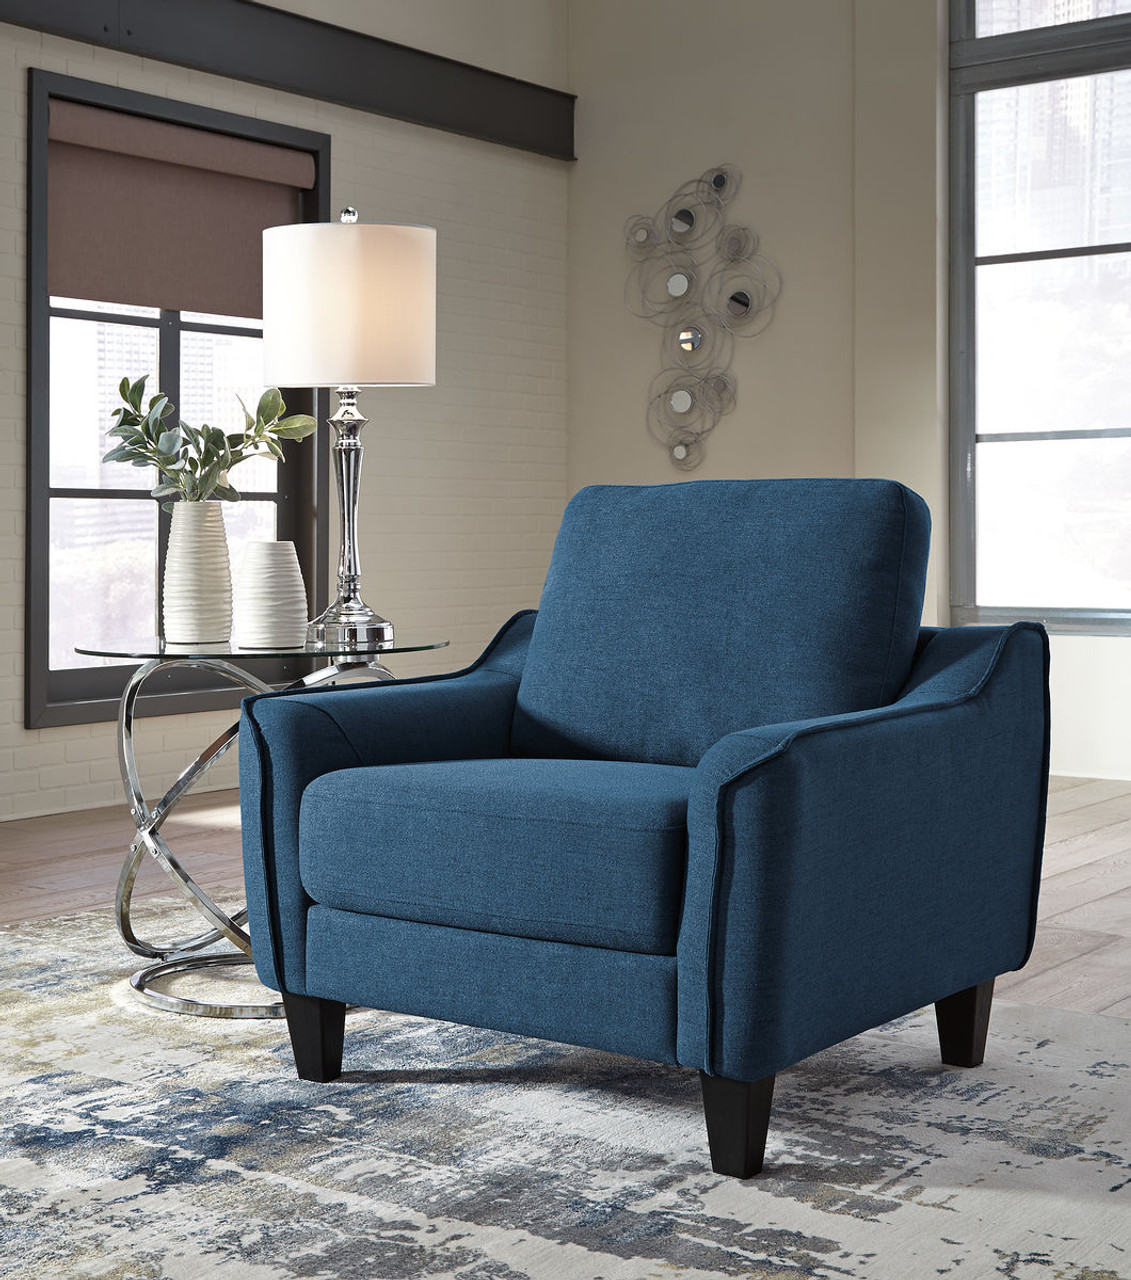 The Jarreau Blue Chair Sold At Rose Brothers Furniture Serving